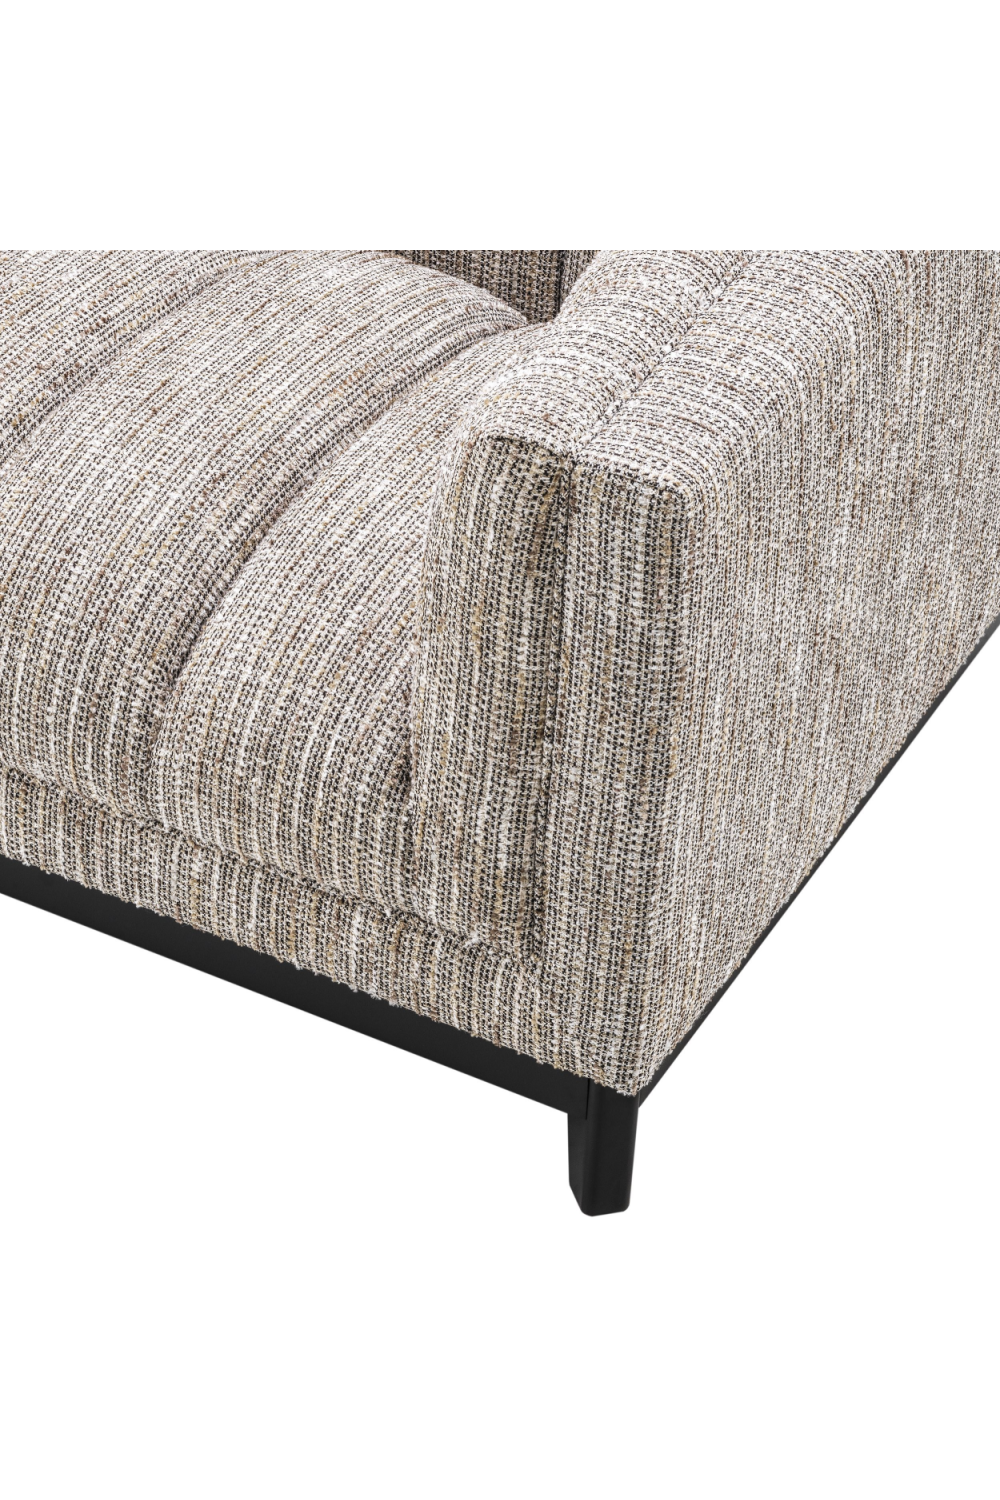 Beige Upholstered Channel Stitched Chair | Eichholtz Ditmar | OROA.com